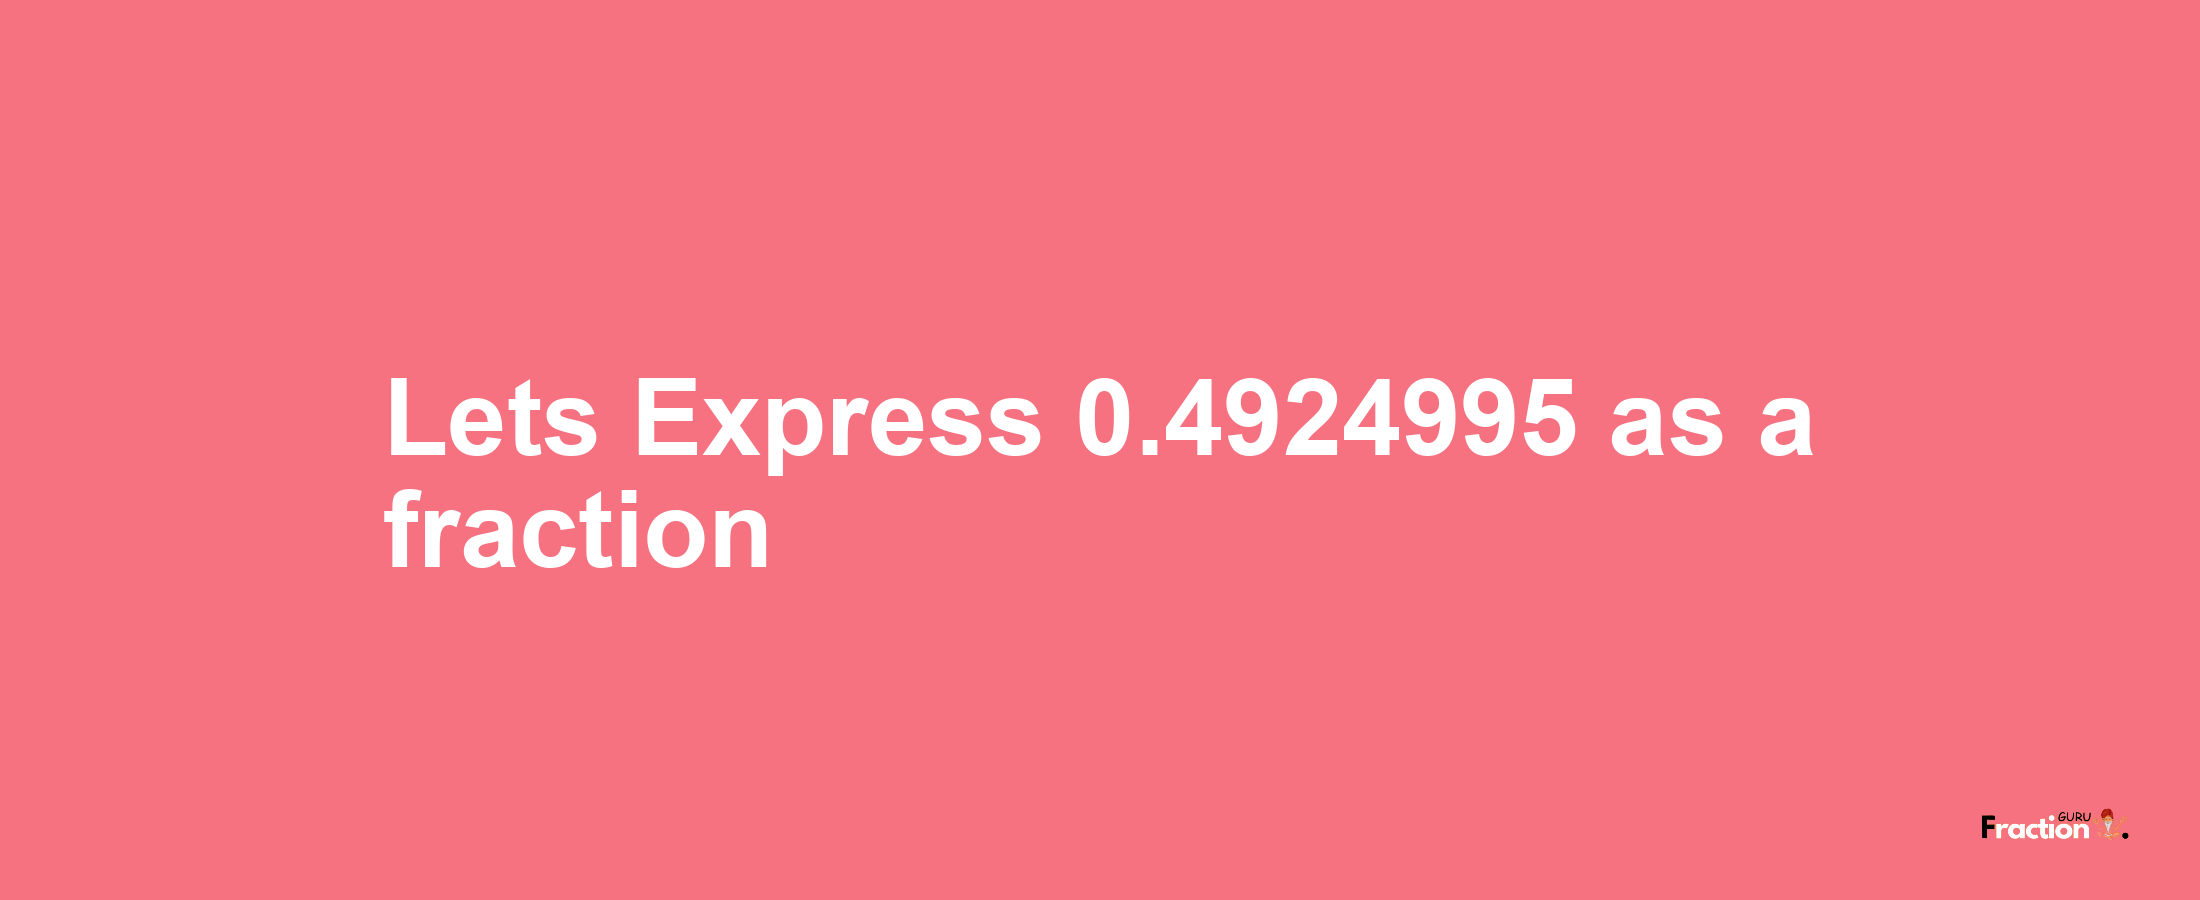 Lets Express 0.4924995 as afraction